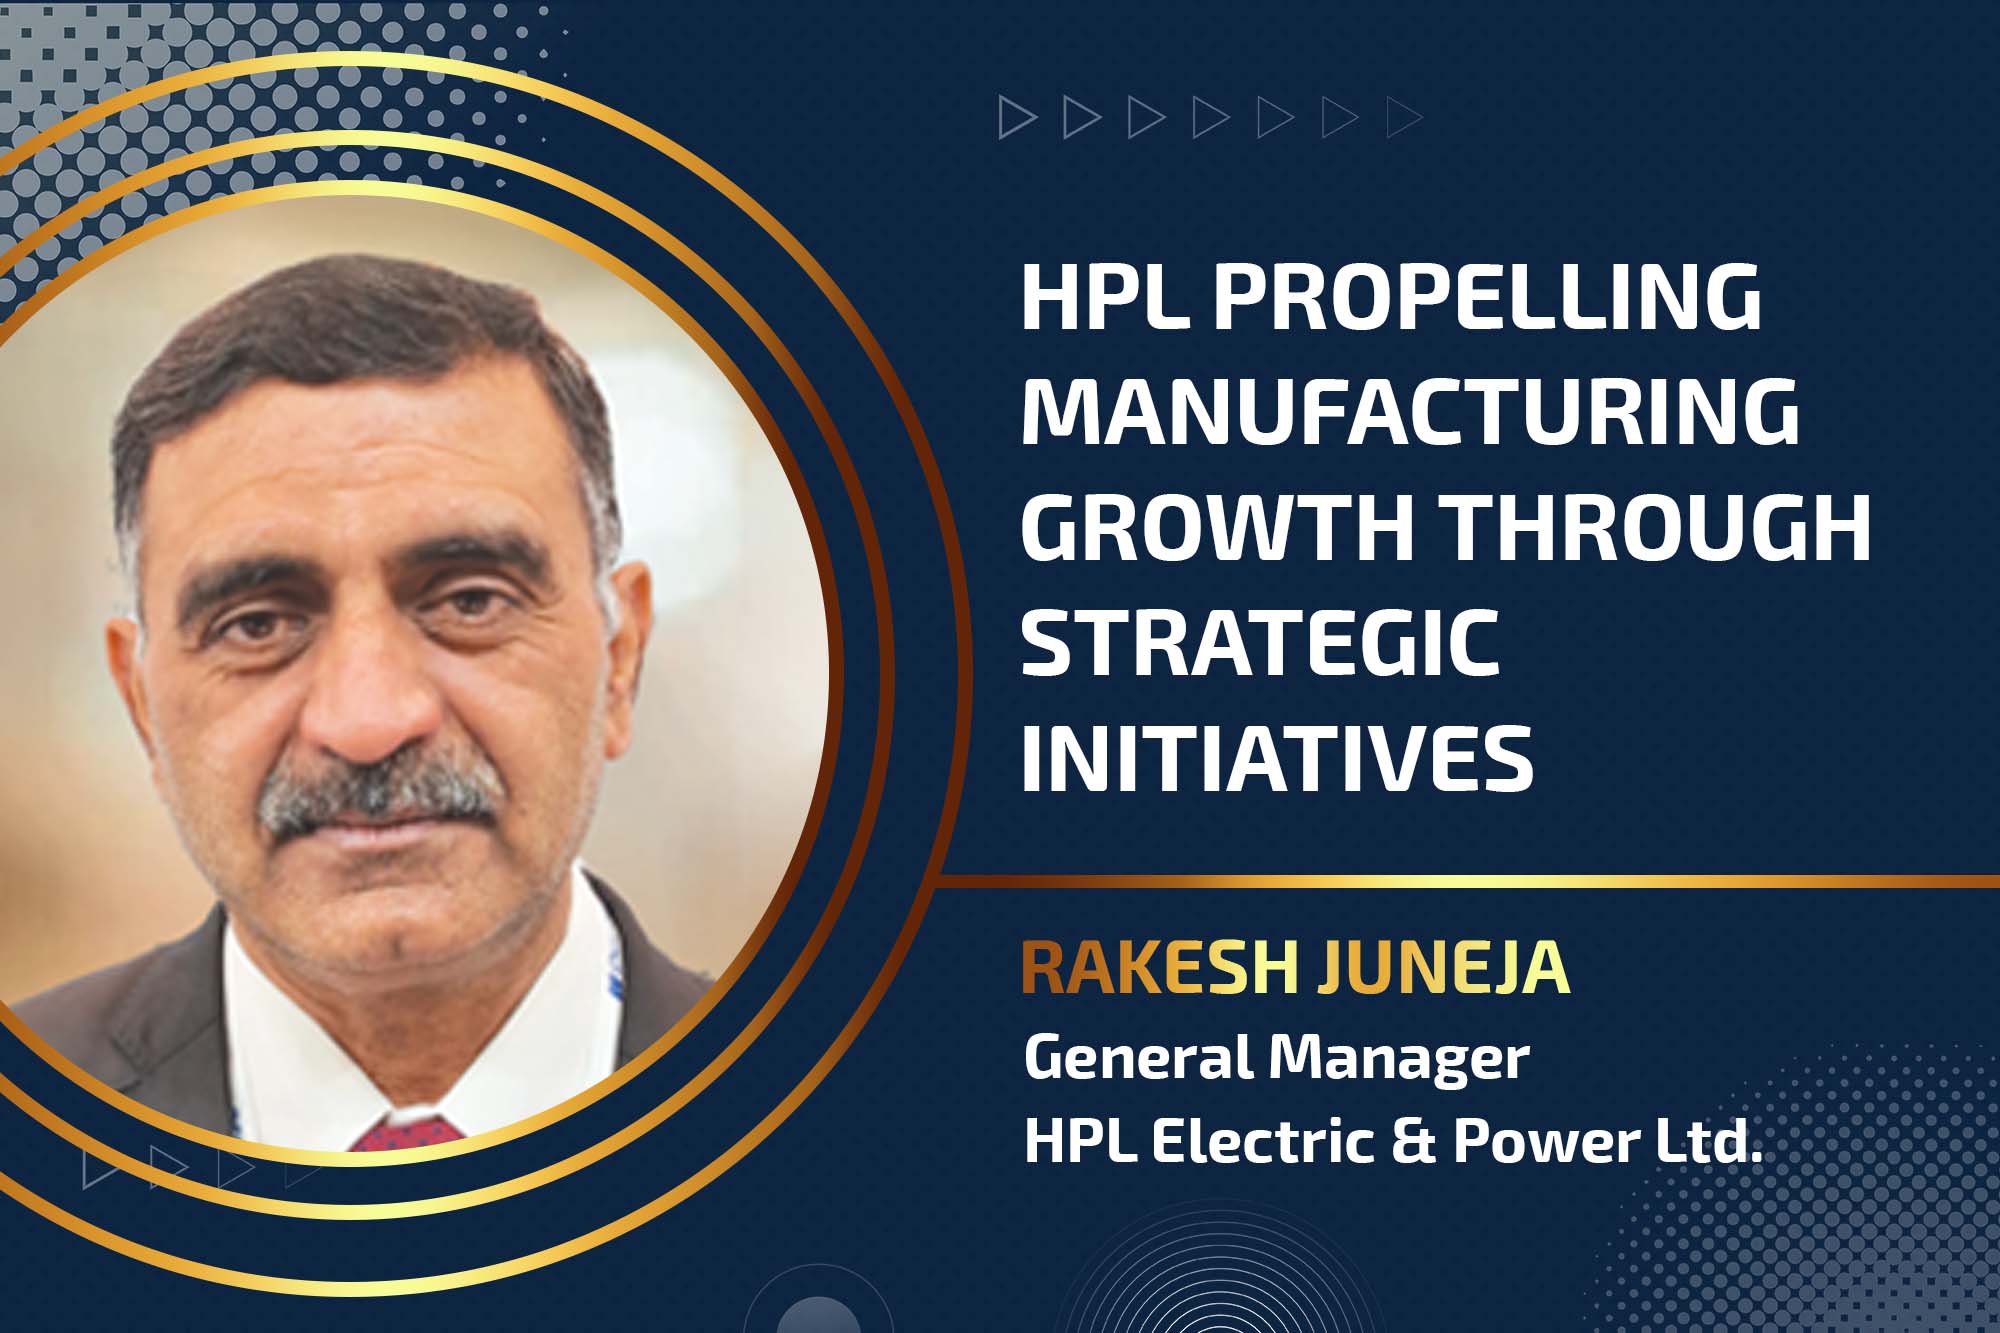 HPL propelling manufacturing growth through strategic initiatives